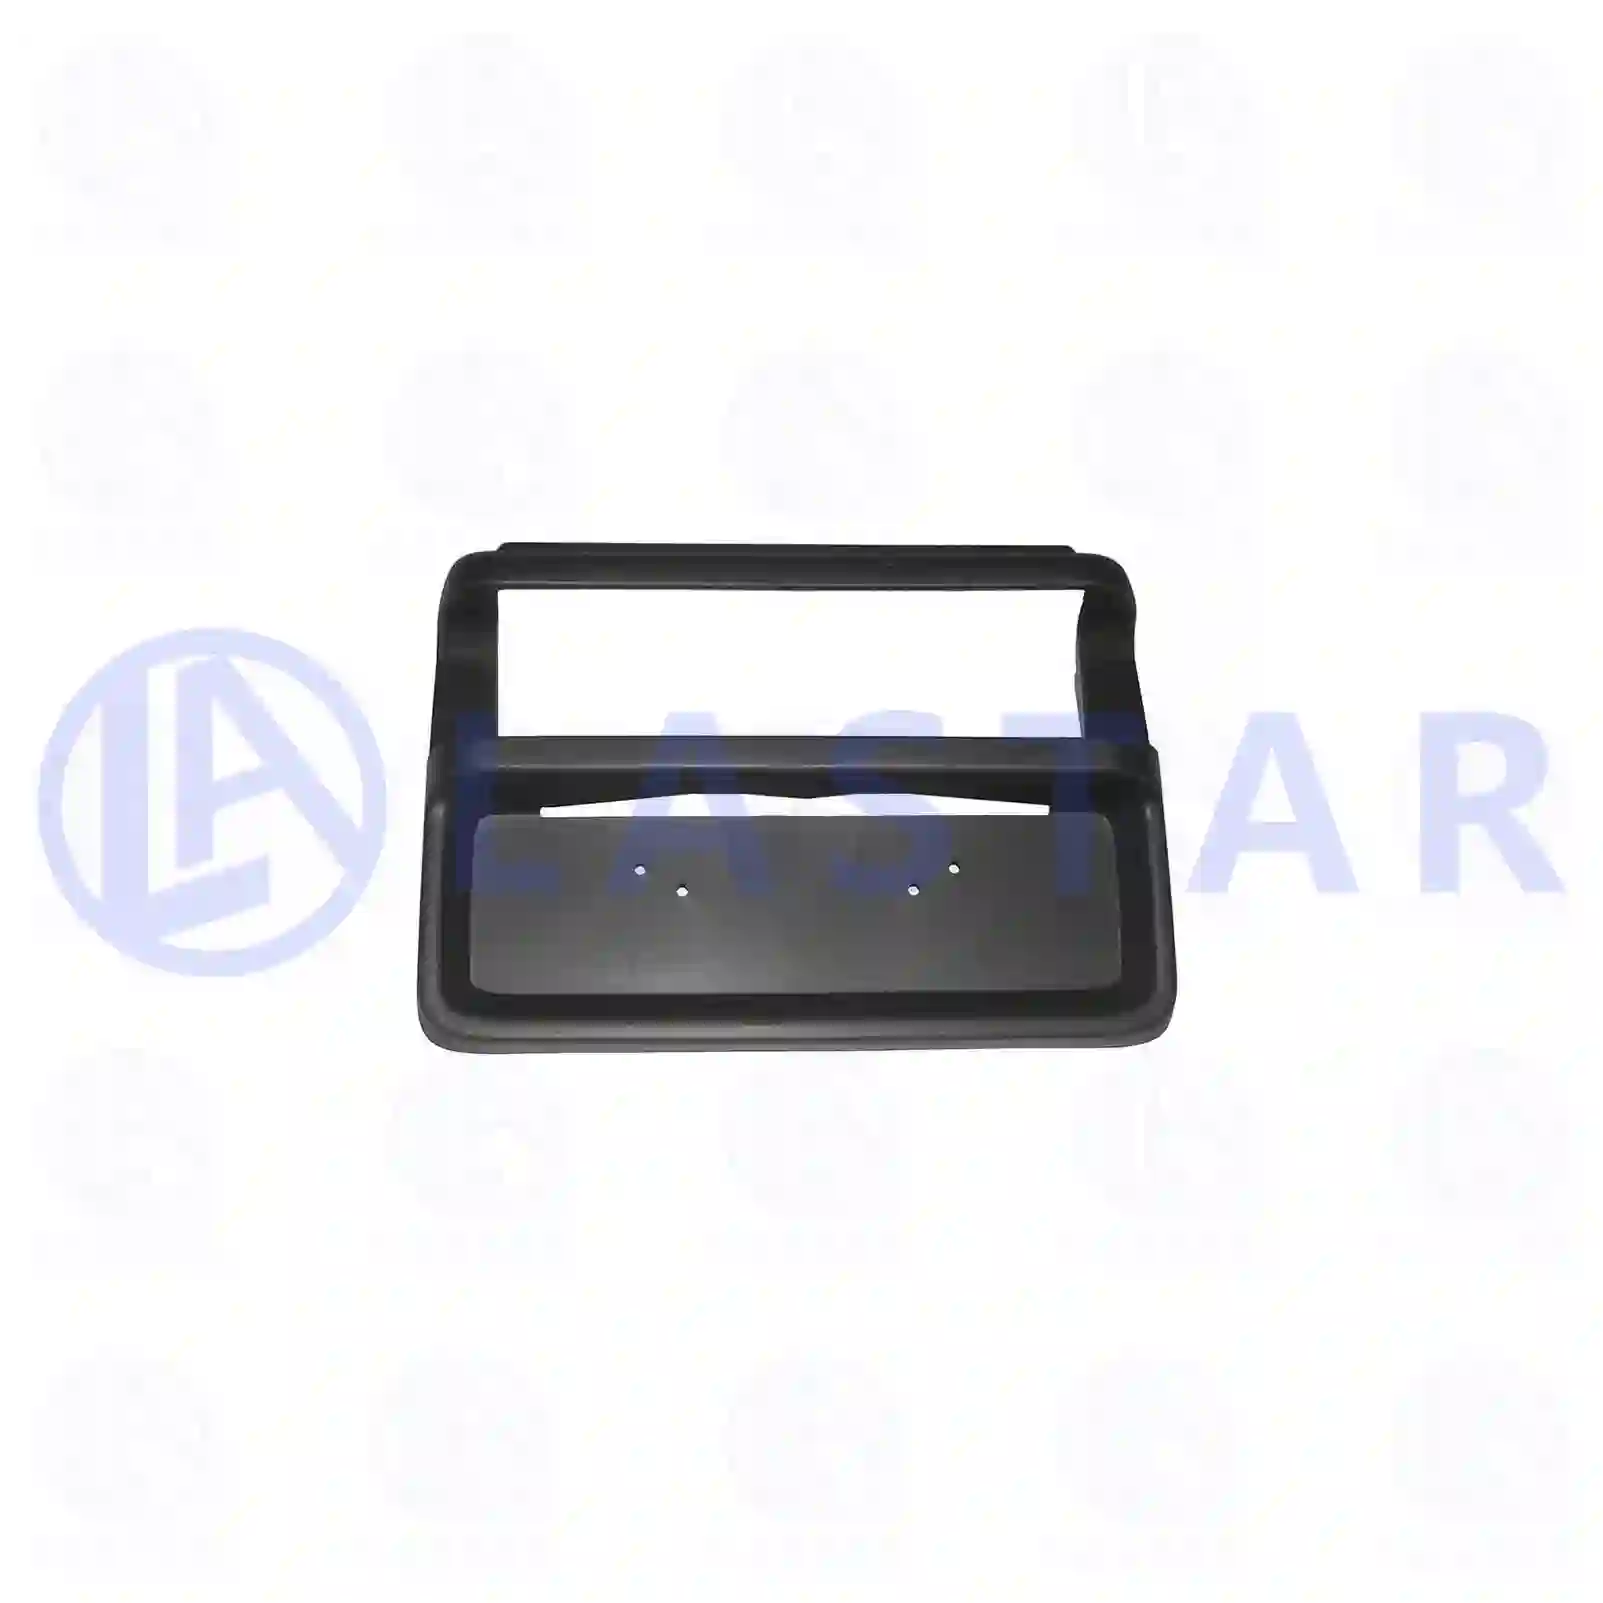 Fender cover, right, 77721515, 1368652, ZG60753-0008 ||  77721515 Lastar Spare Part | Truck Spare Parts, Auotomotive Spare Parts Fender cover, right, 77721515, 1368652, ZG60753-0008 ||  77721515 Lastar Spare Part | Truck Spare Parts, Auotomotive Spare Parts